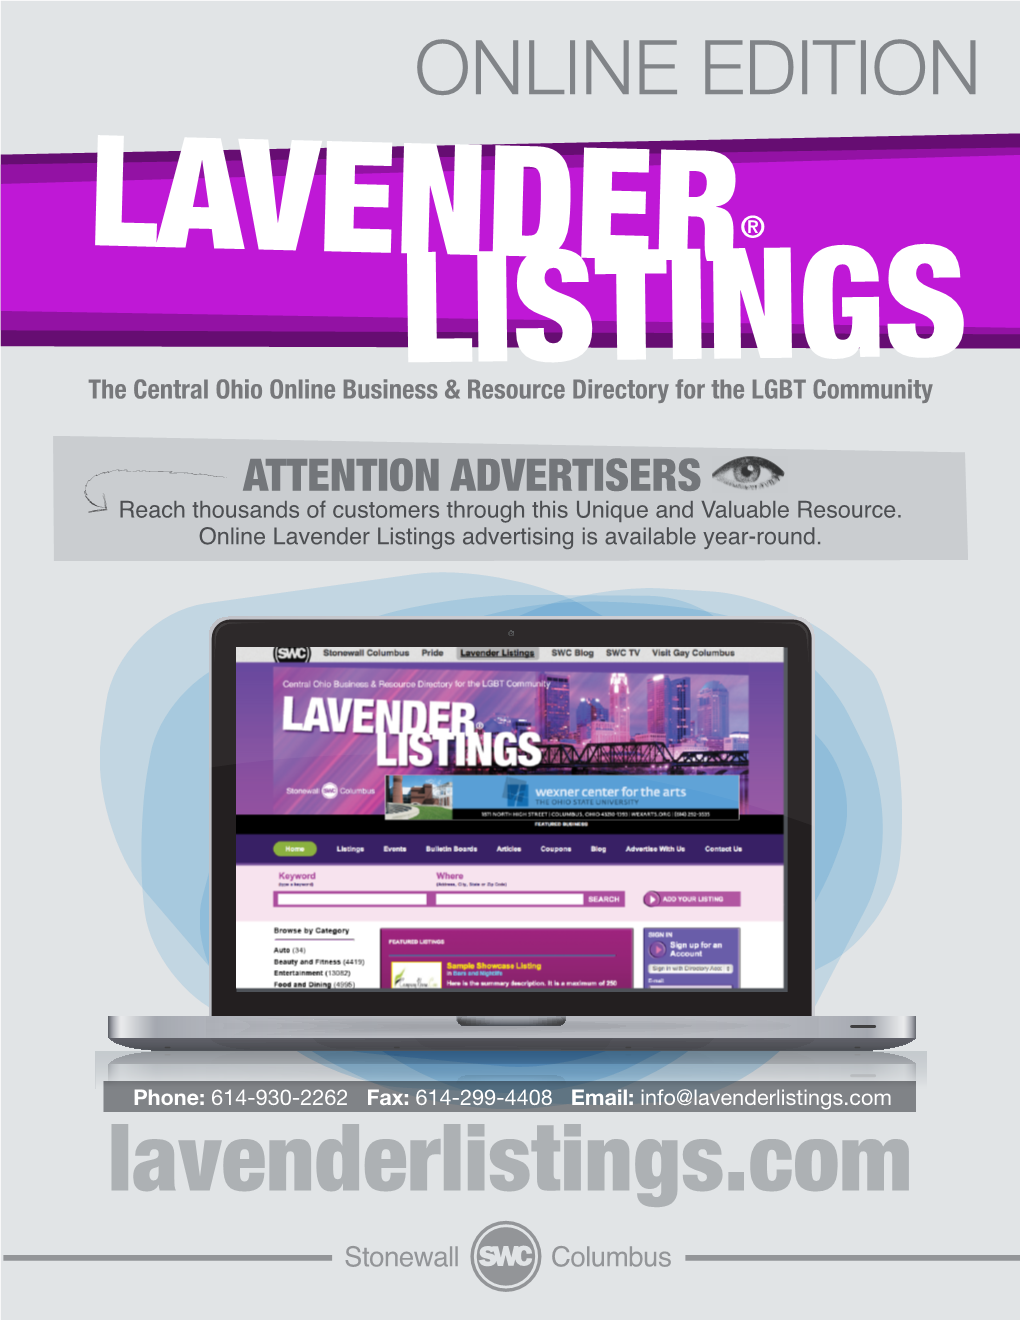 Lavenderlistings.Com Lavenderlistings.Com Lavenderlistings.Com: the Central Ohio Online Business & Resource Directory for the LGBT Community Online Ads